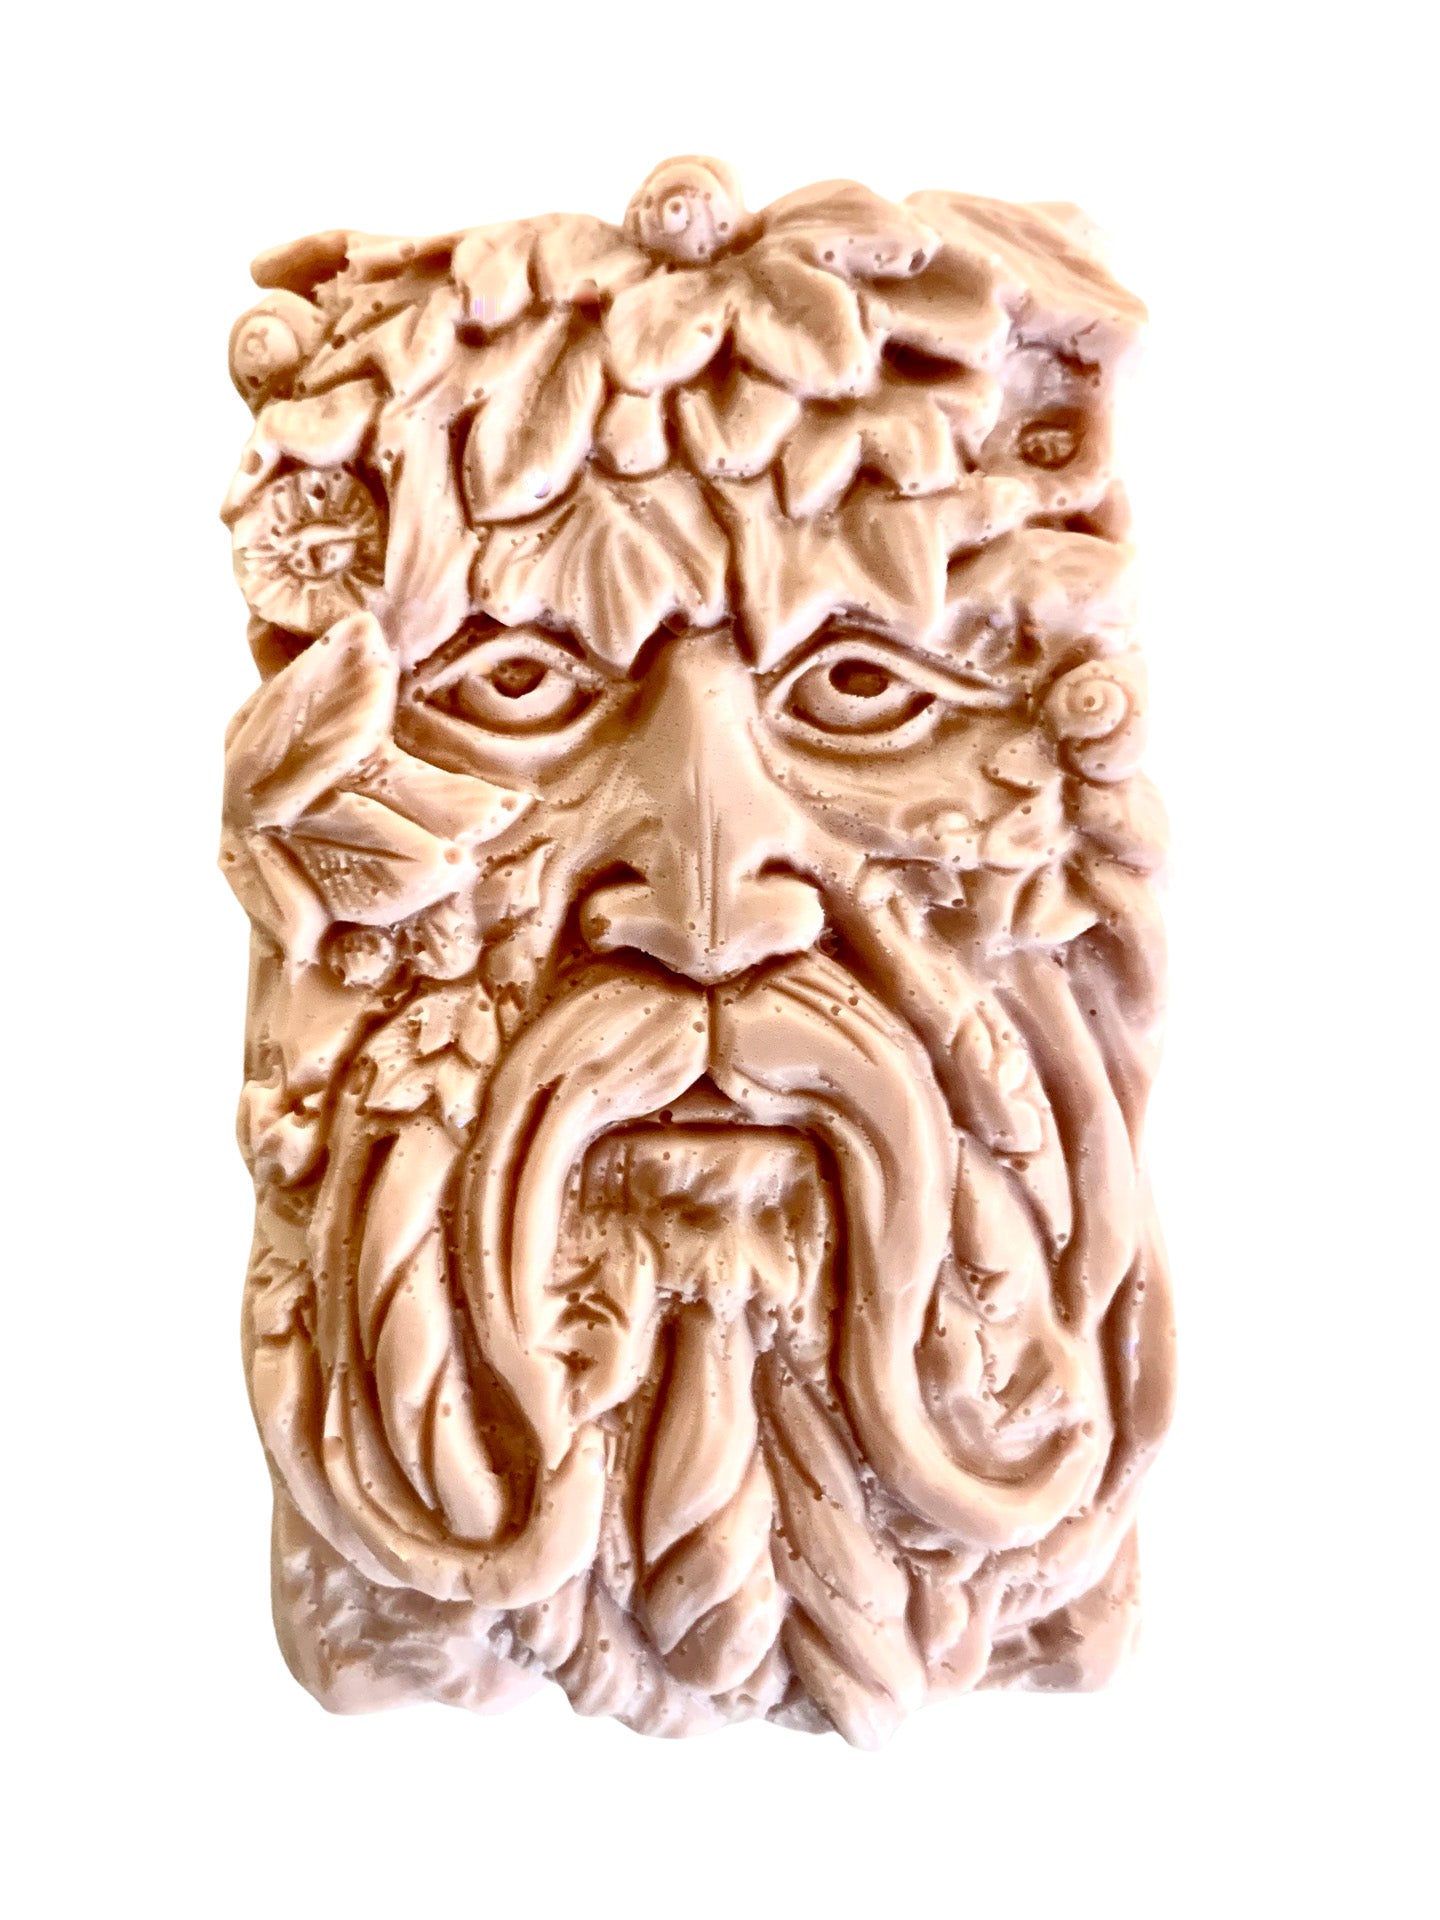 Forest Man Soap